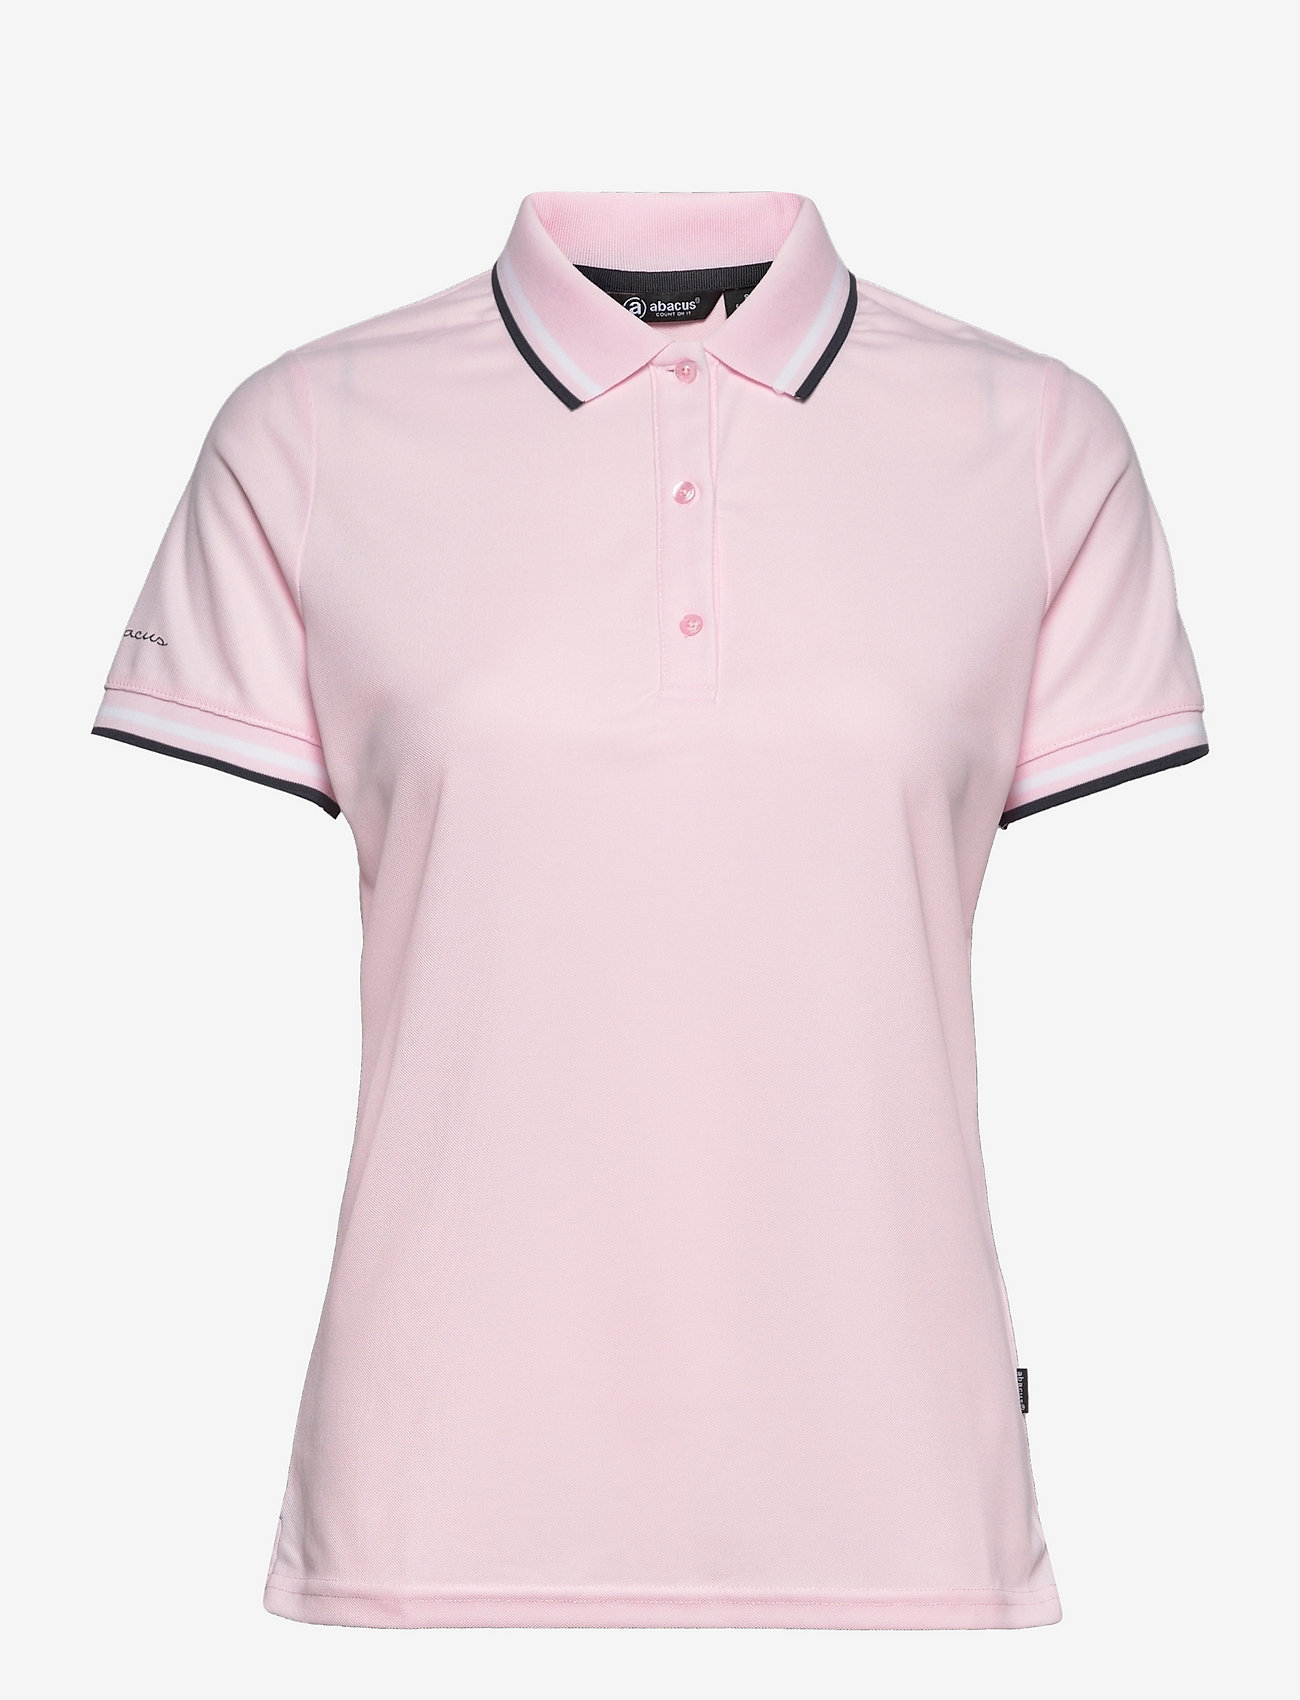 Abacus - Lds Pines polo - poloshirts - lt.pink - 0